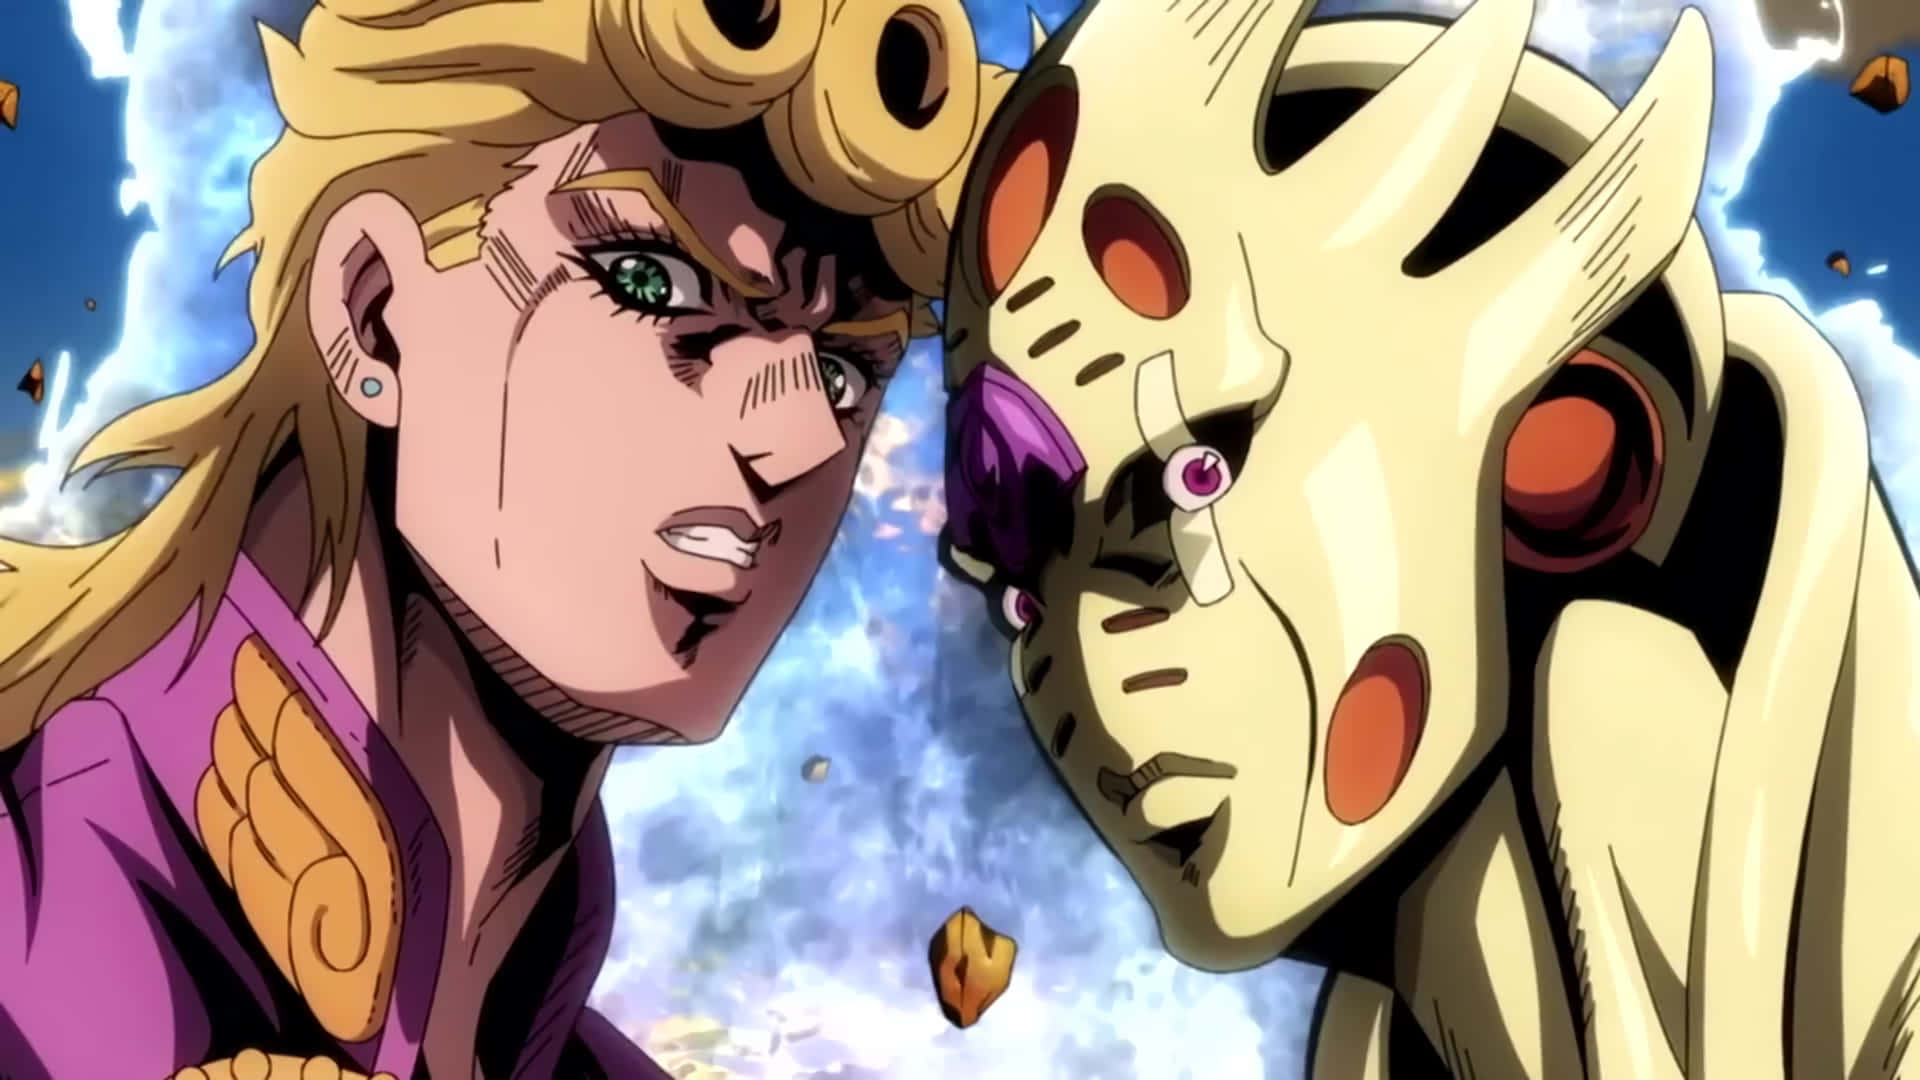 Vento Aureo's main protagonists in action Wallpaper